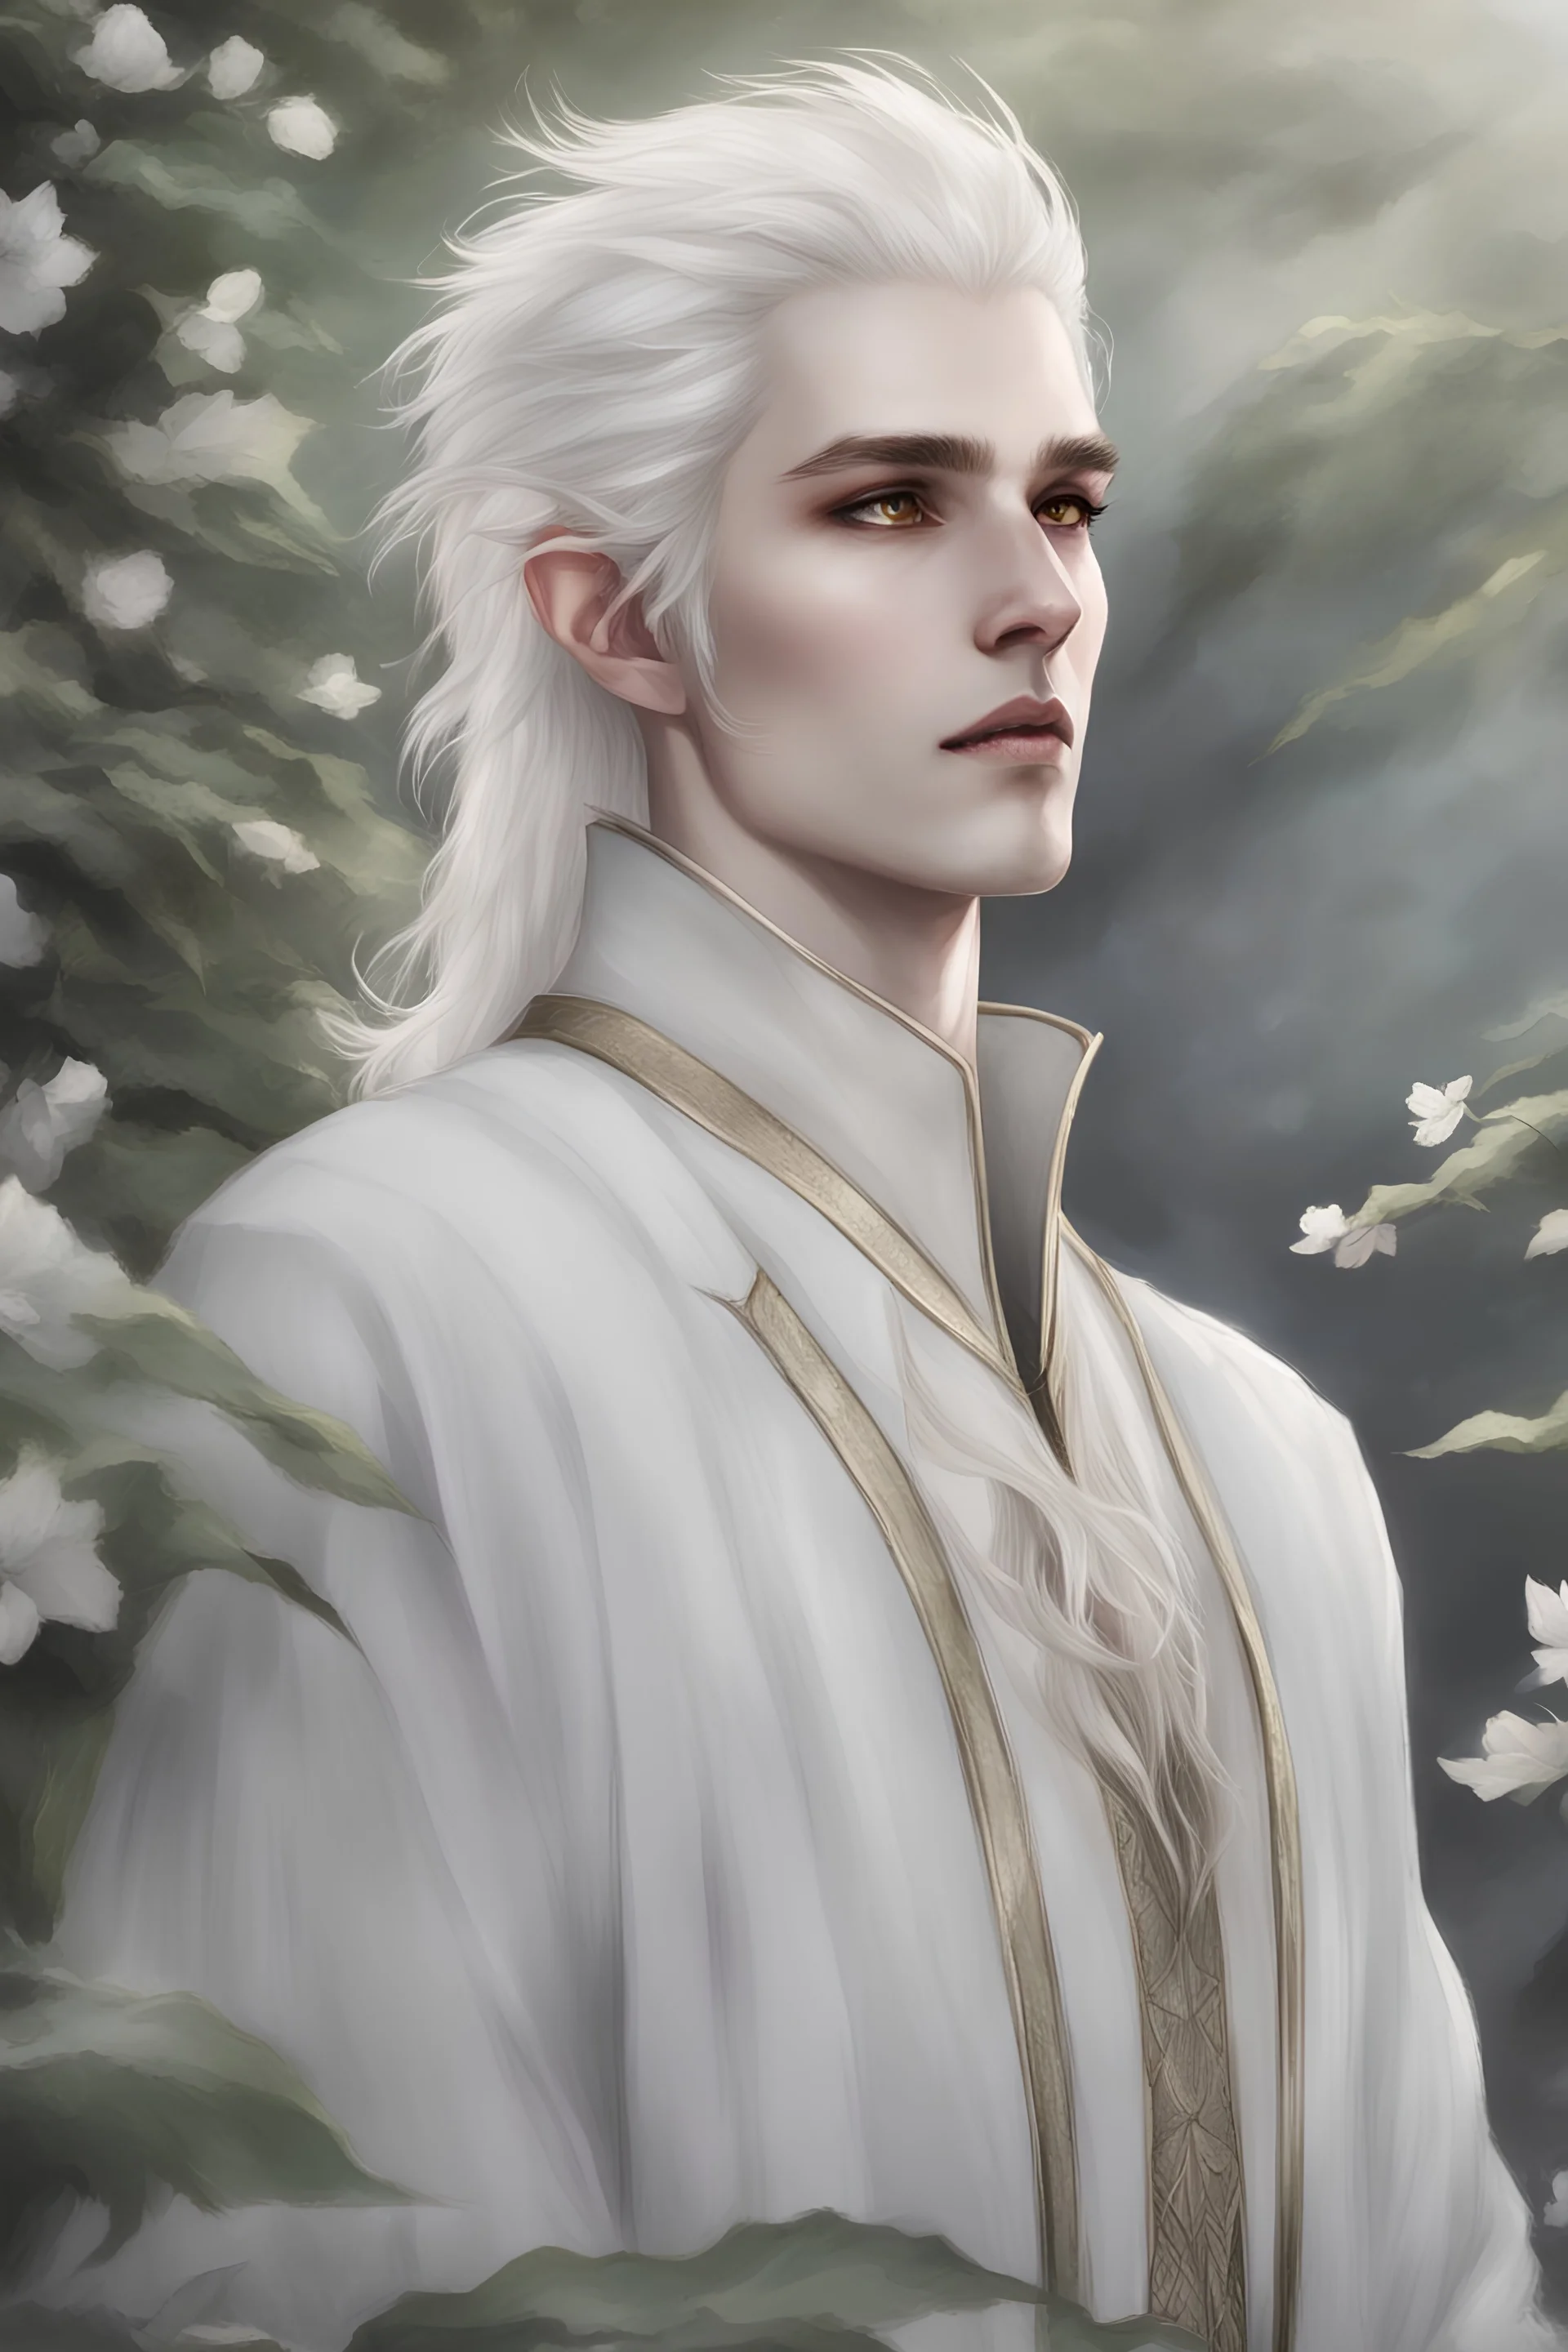 a young male Elf sorcerer with ethereal white skin and hair, complemented by striking black eyes